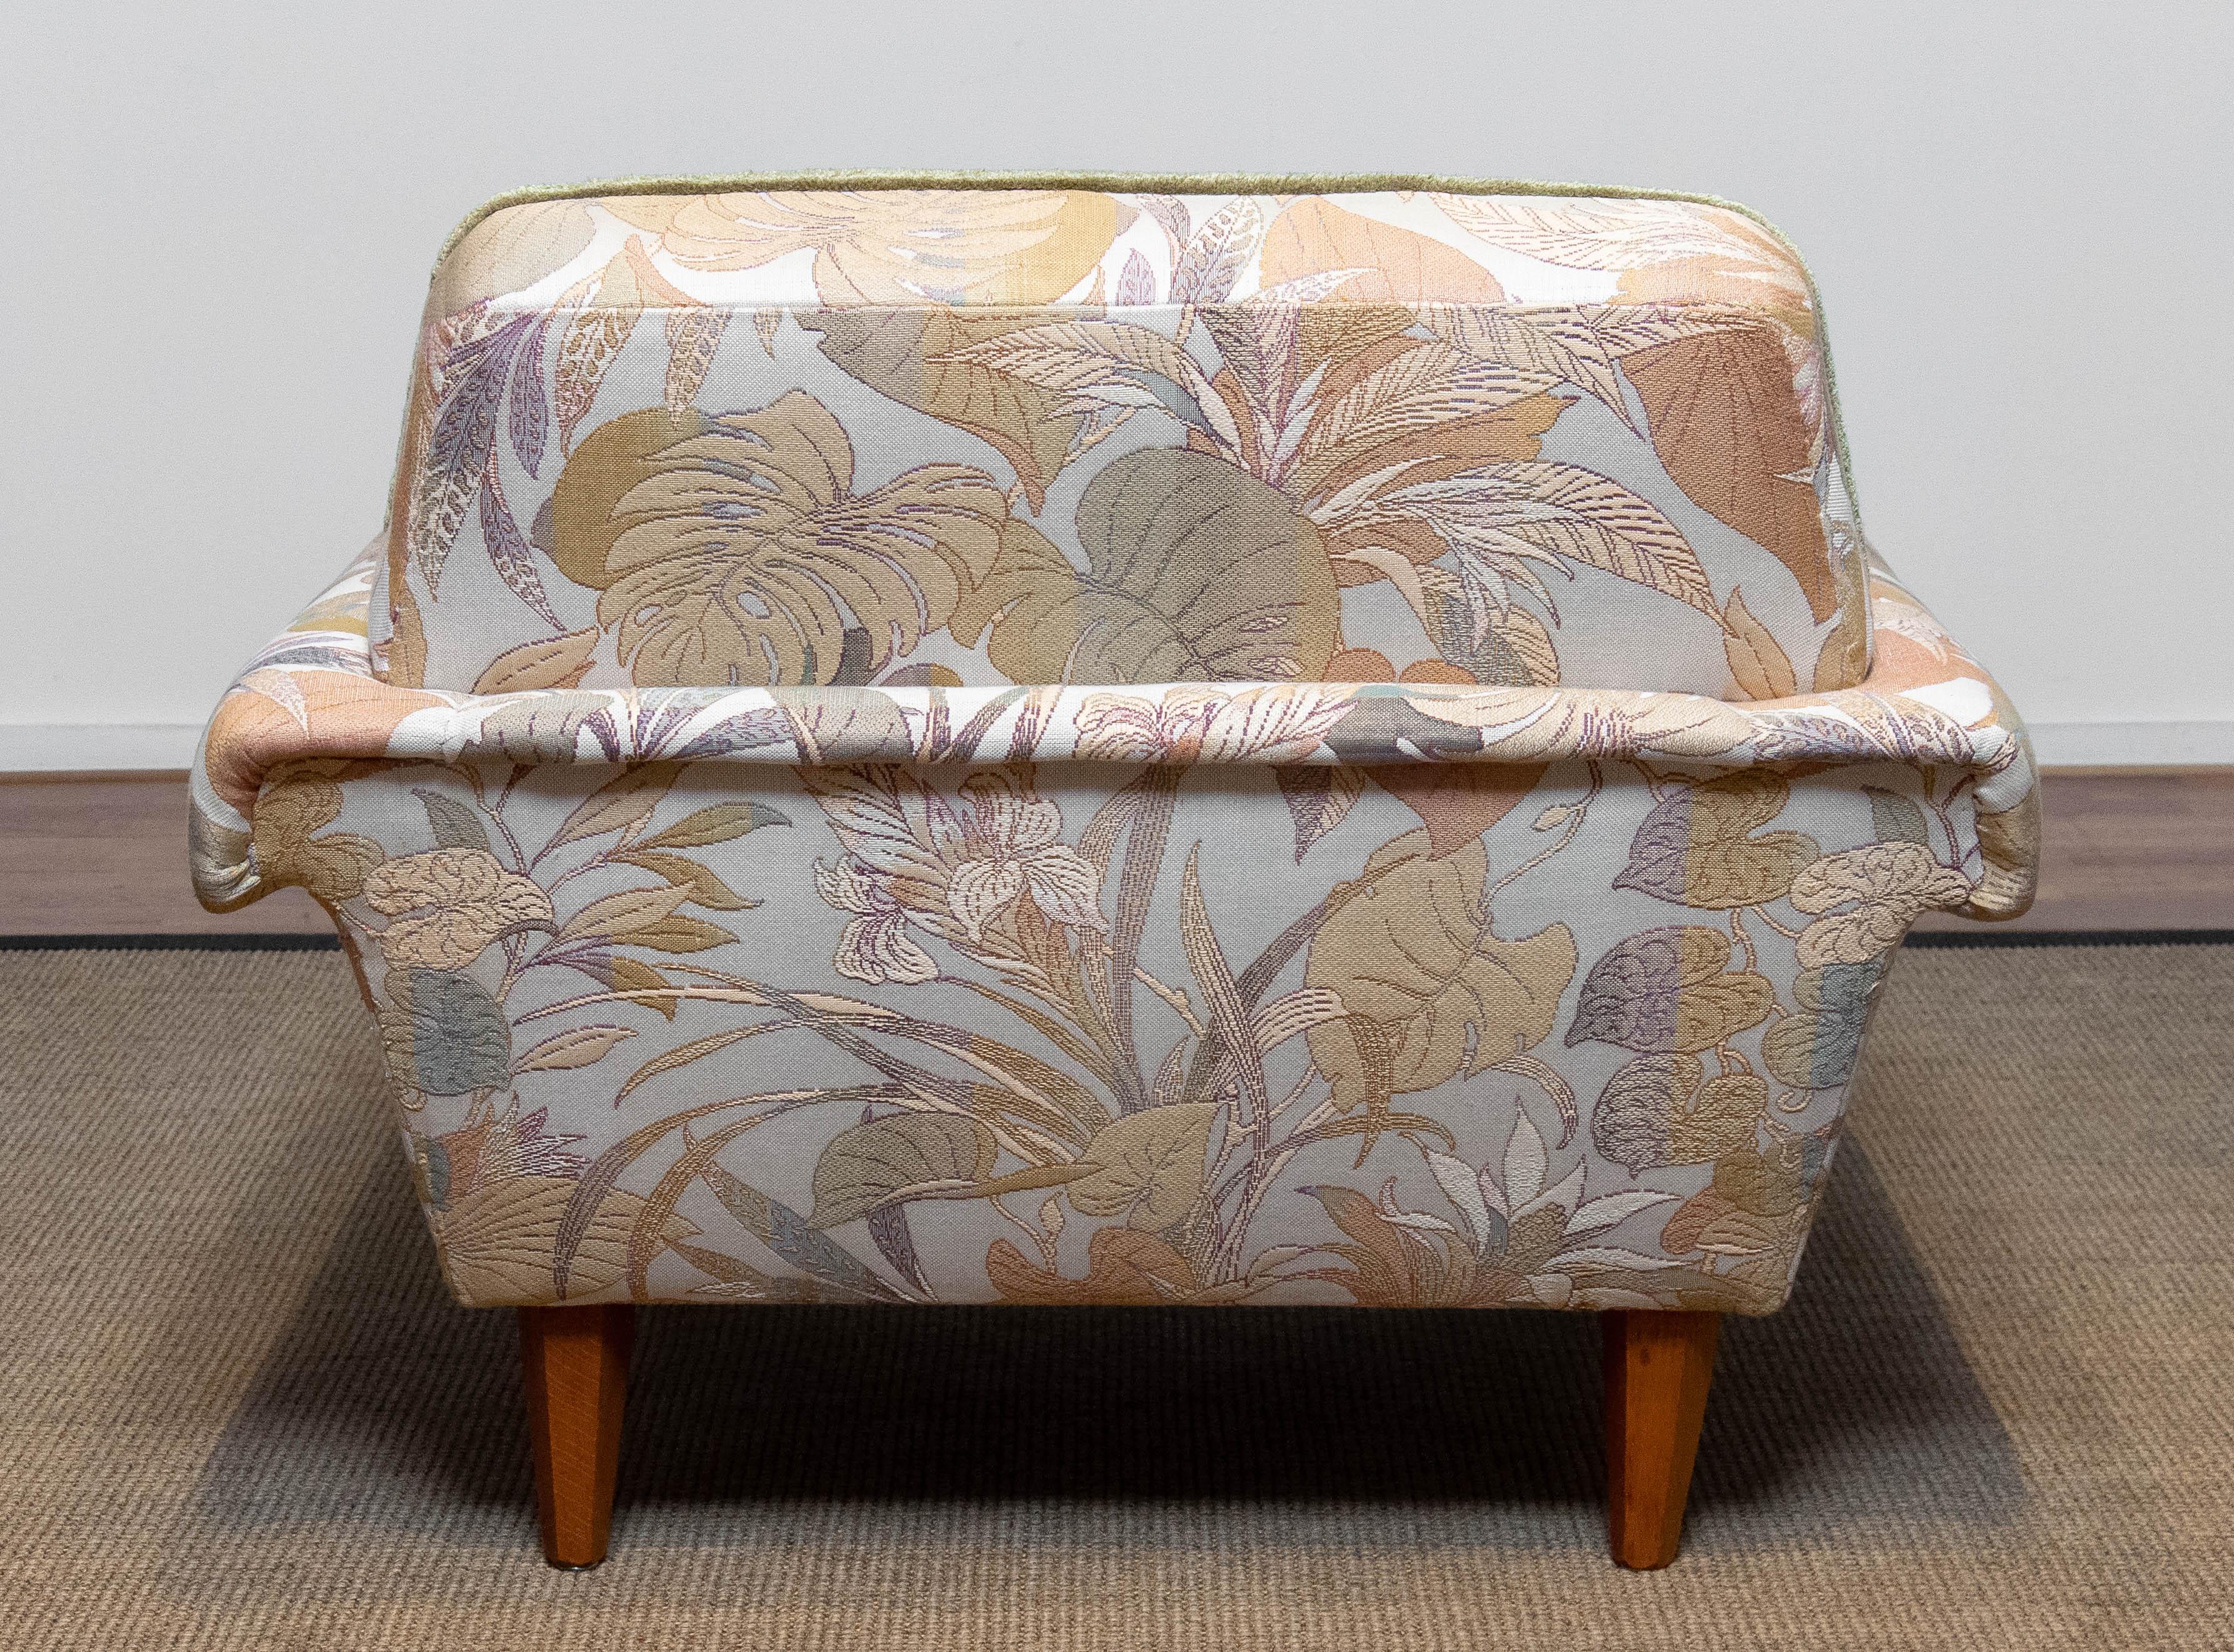 Danish Low Back Lounge Chair Upholstered Floral Jacquard Fabric from the 1970's For Sale 1